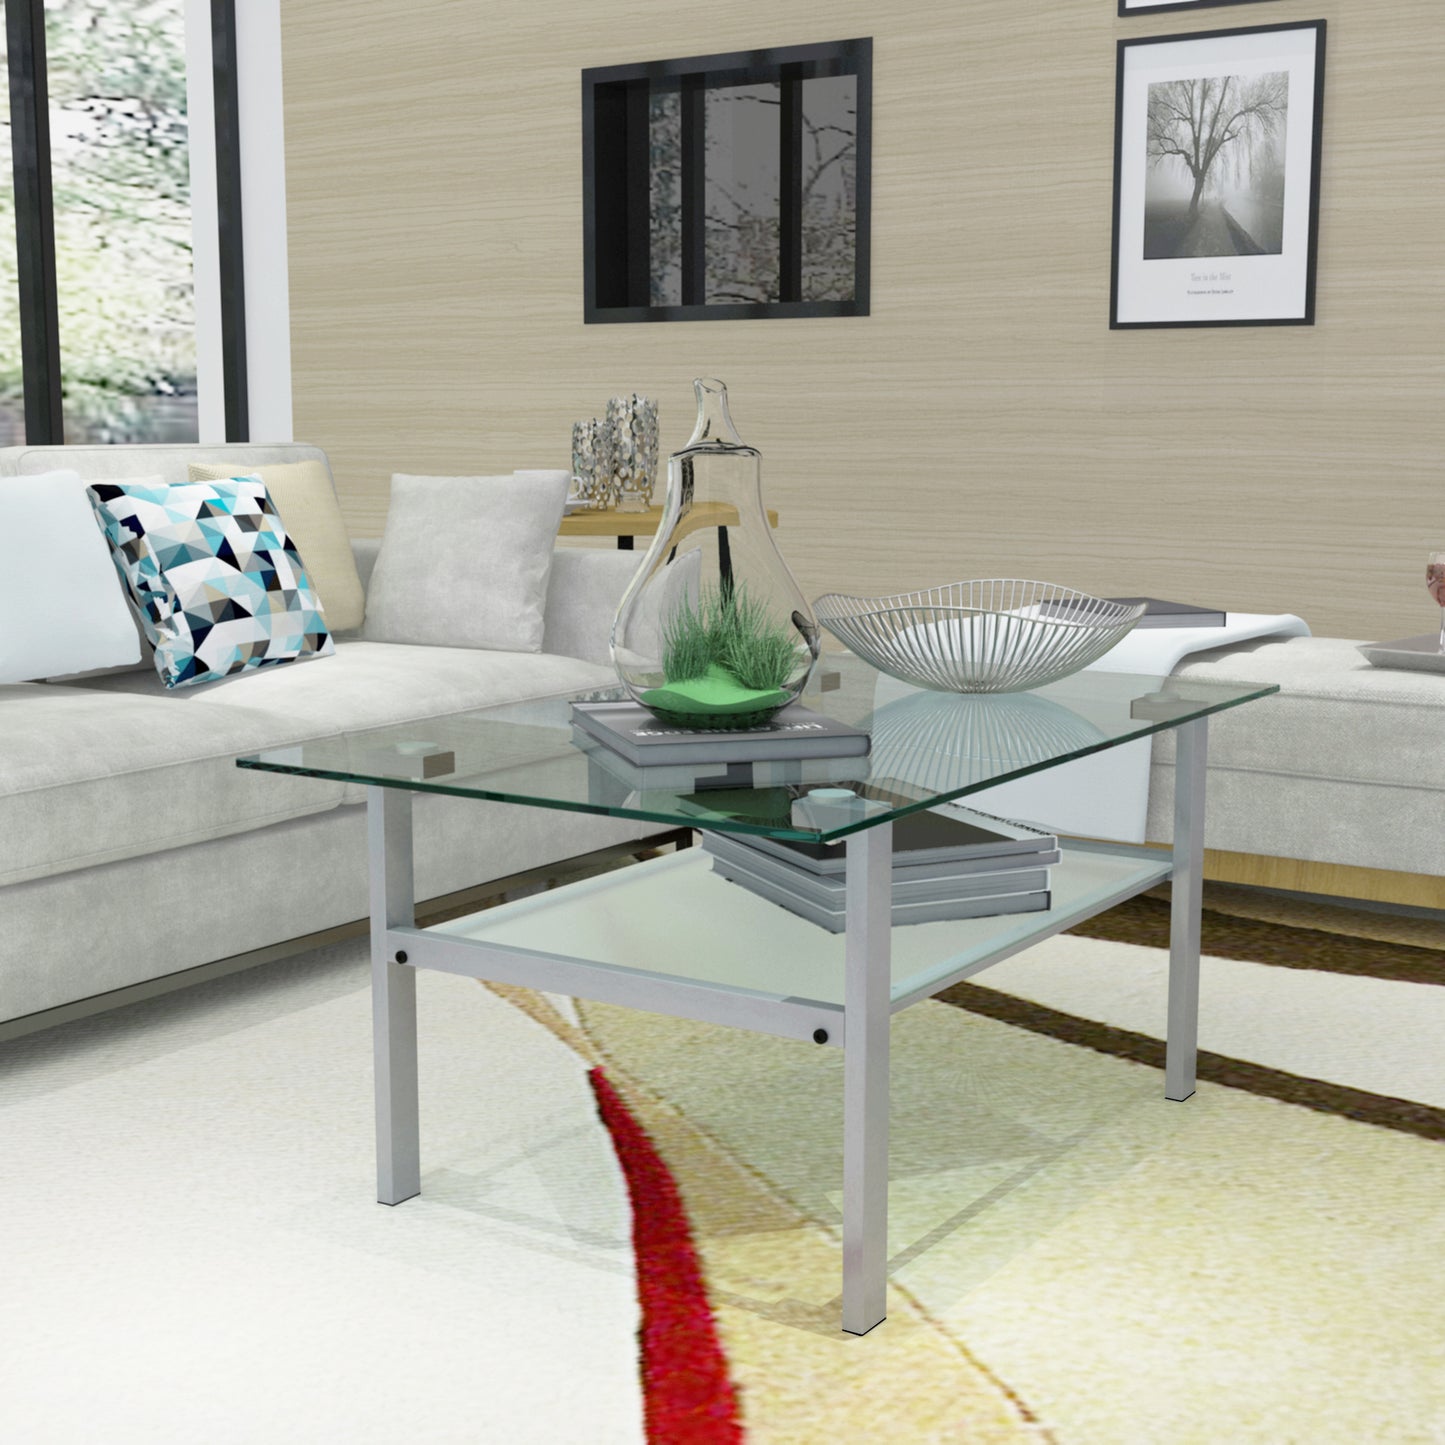 Sleek Grey Glass Coffee Table - Versatile and Stylish Addition for Any Room